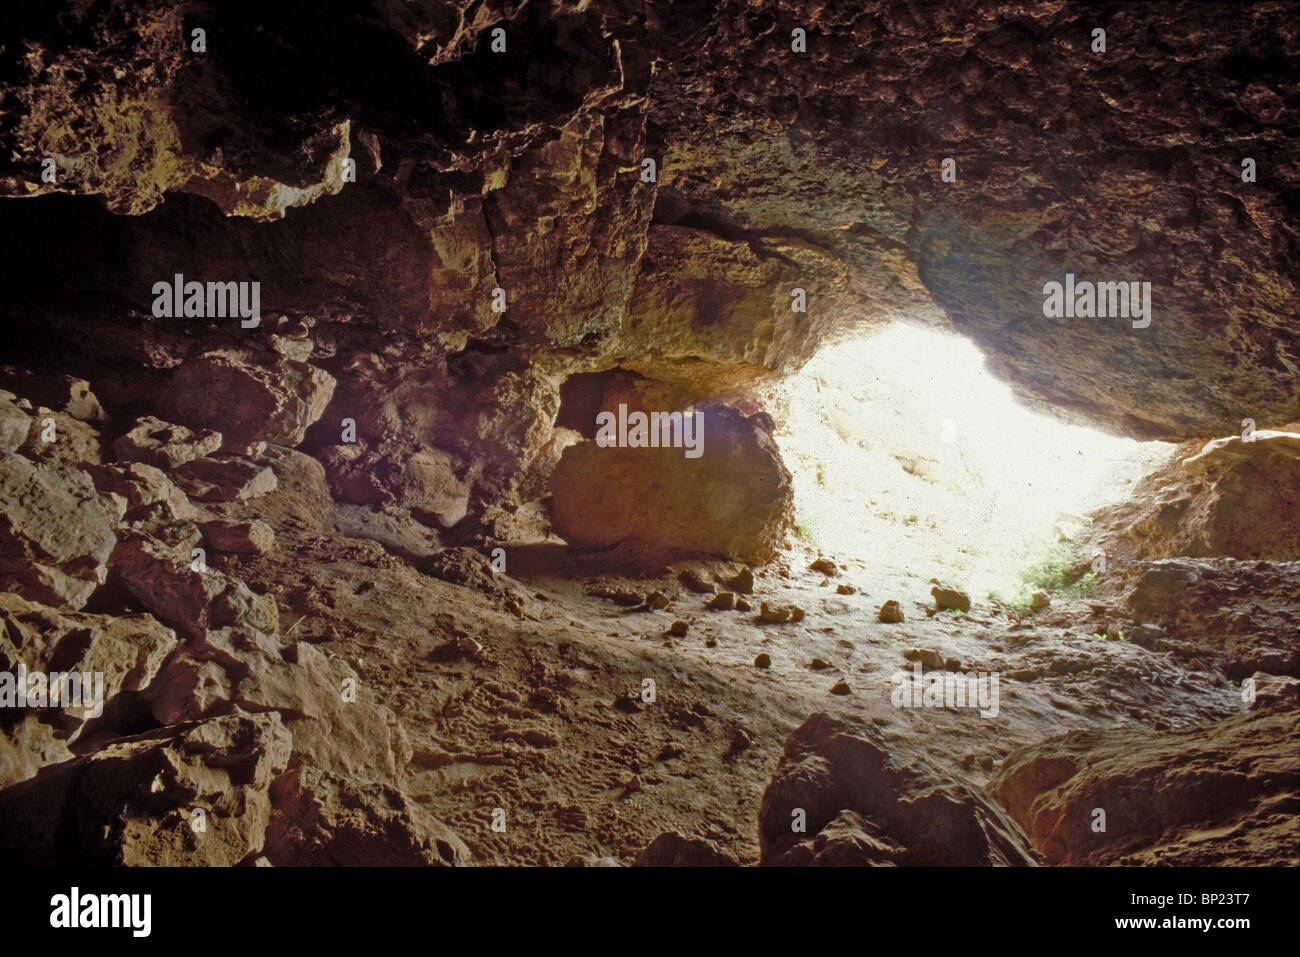 300. QUMRAN - INTERIOR OF CAVE NO.11 IN WHICH THE 'TEMPLE SCROLL' WAS FOUND Stock Photo